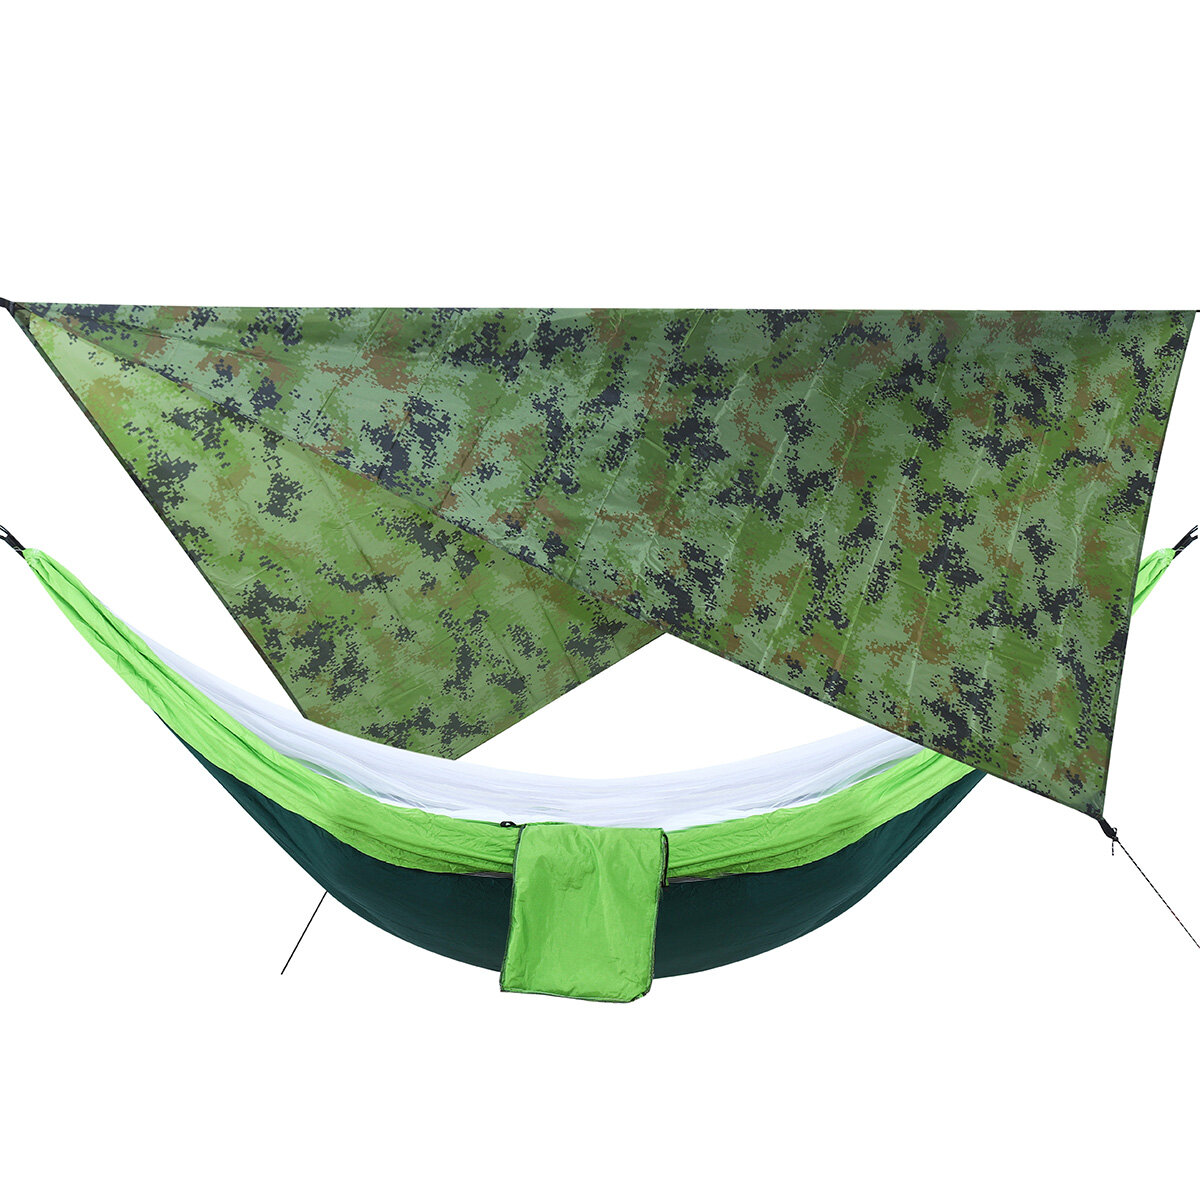 IPRee Camouflage Rain Fly Tarp and Camping Hammock with Mosquito Net Portable Hammock Canopy 210T Plaid Fabric PU Waterproof 2000 Sun Shade Tent Awning For 2 Person